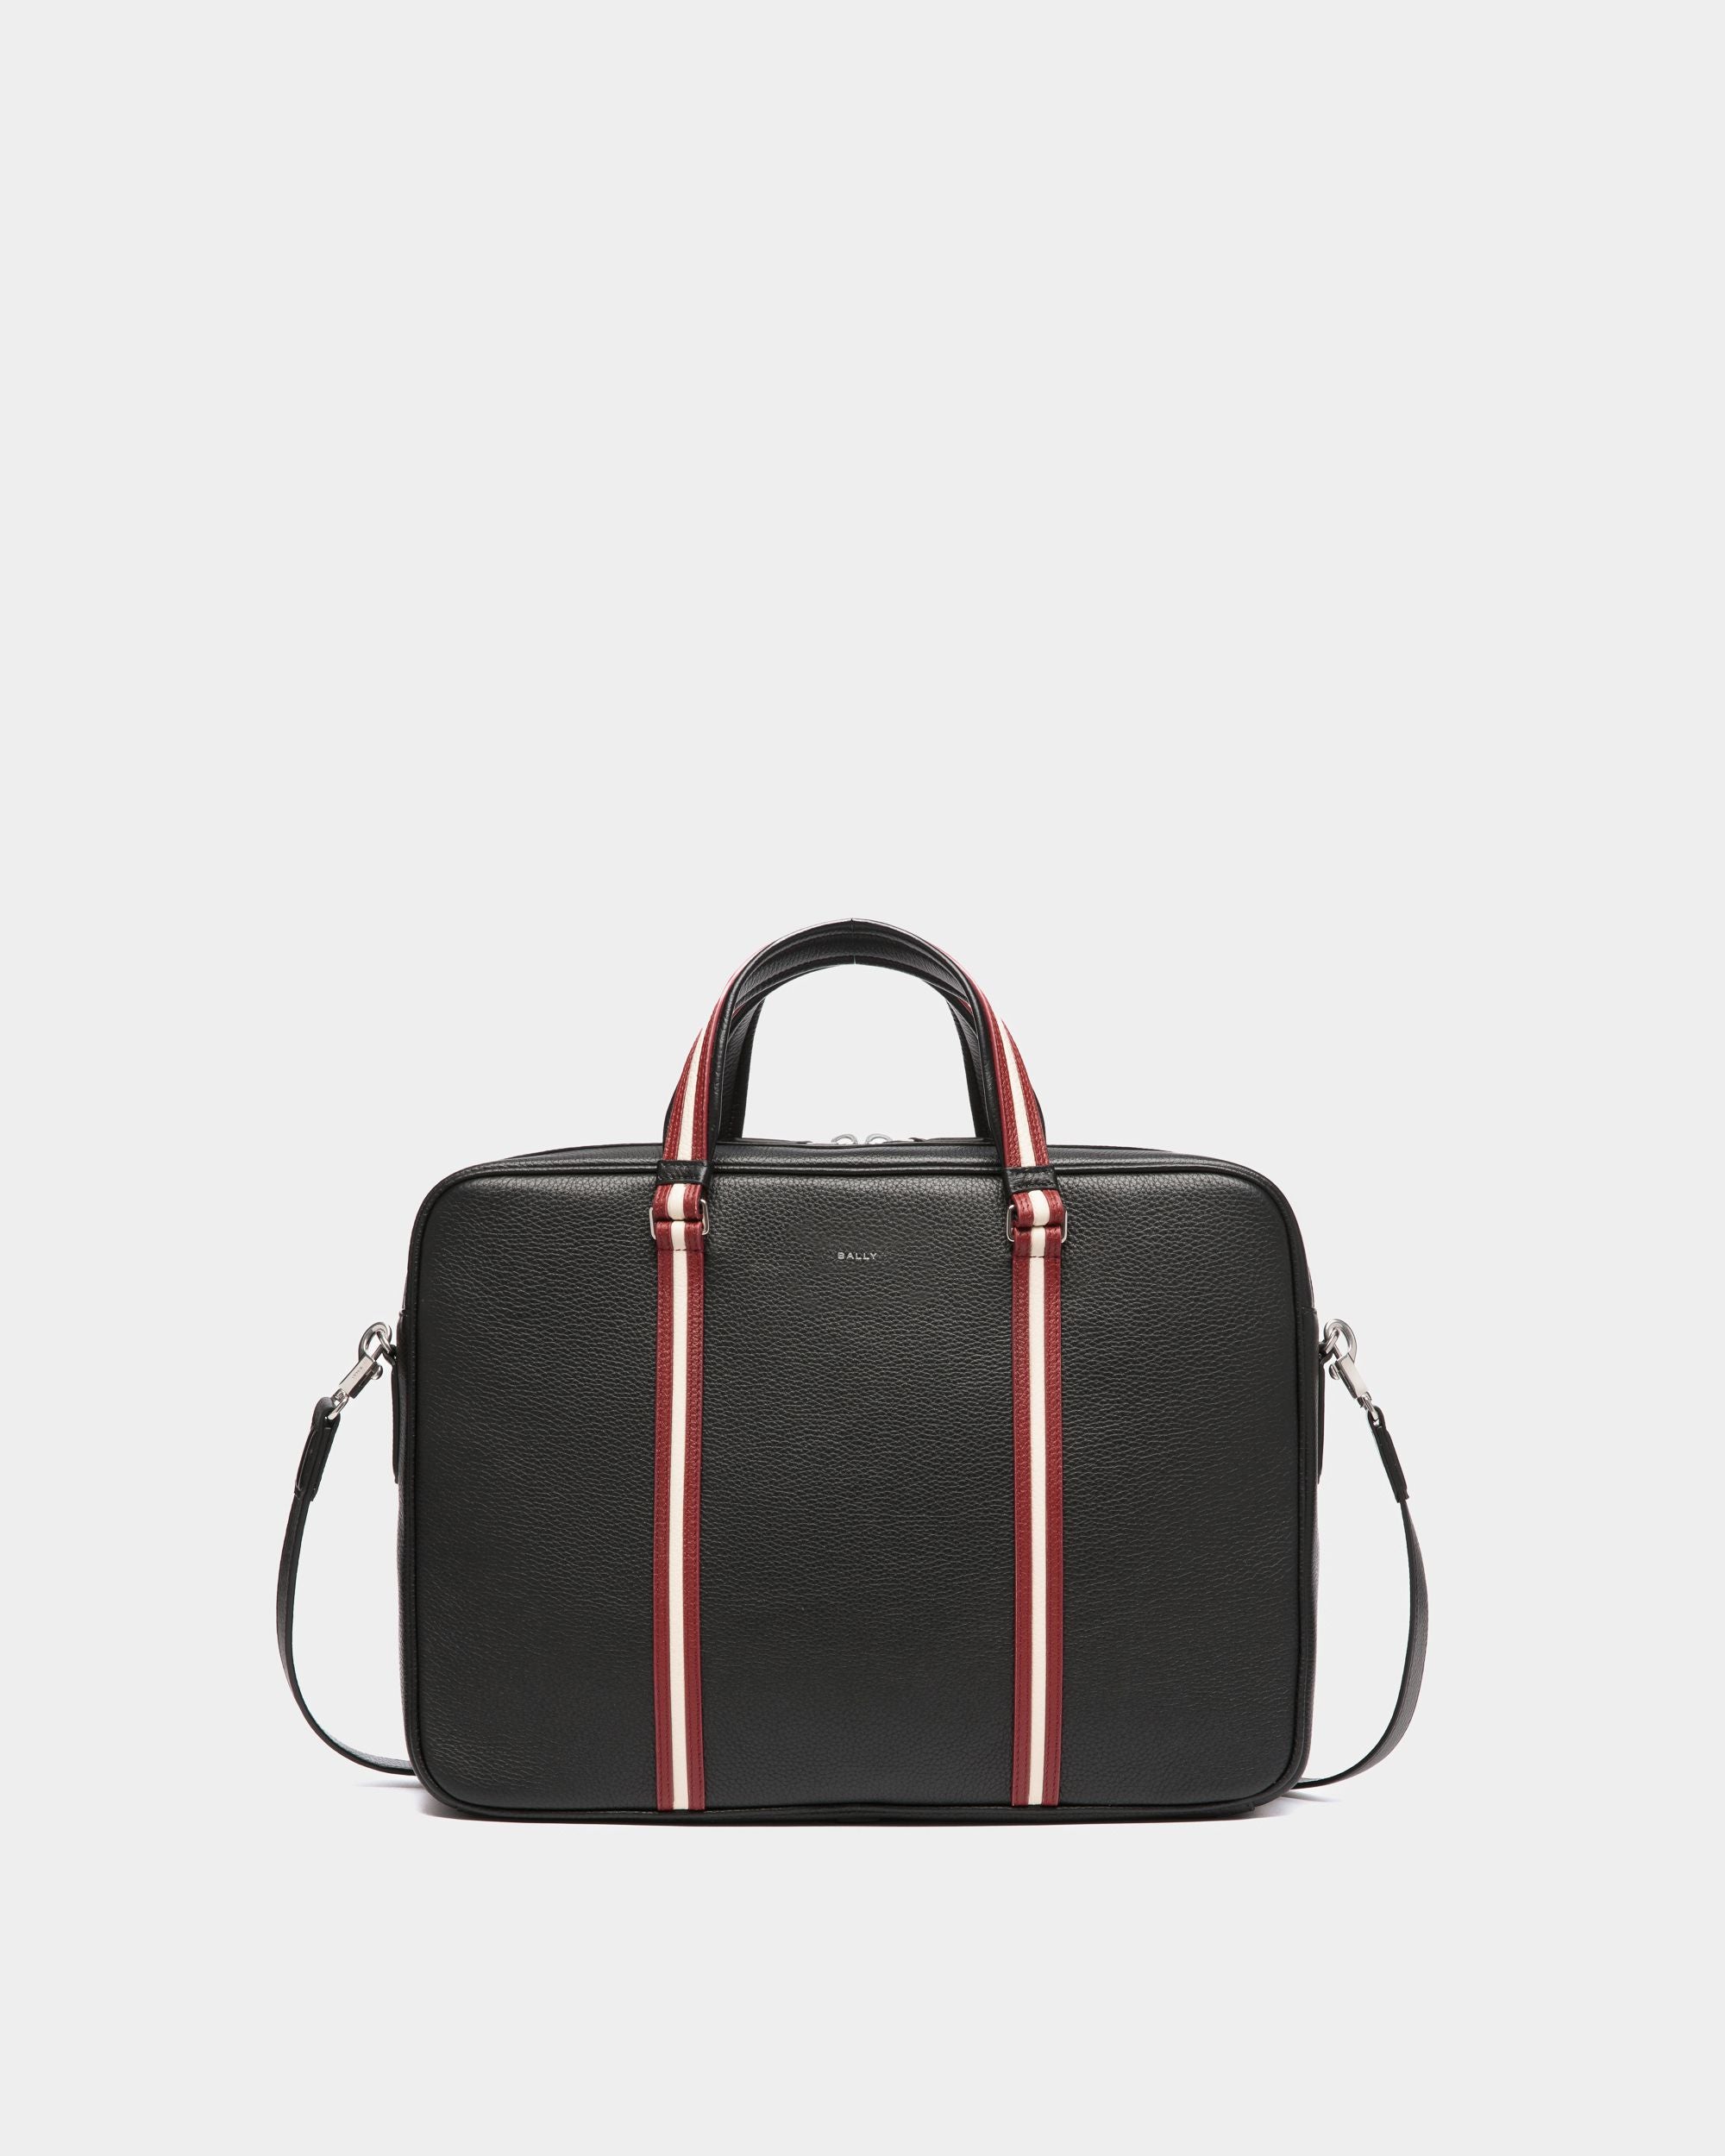 Code | Men's Briefcase in Black Grained Leather | Bally | Still Life Front